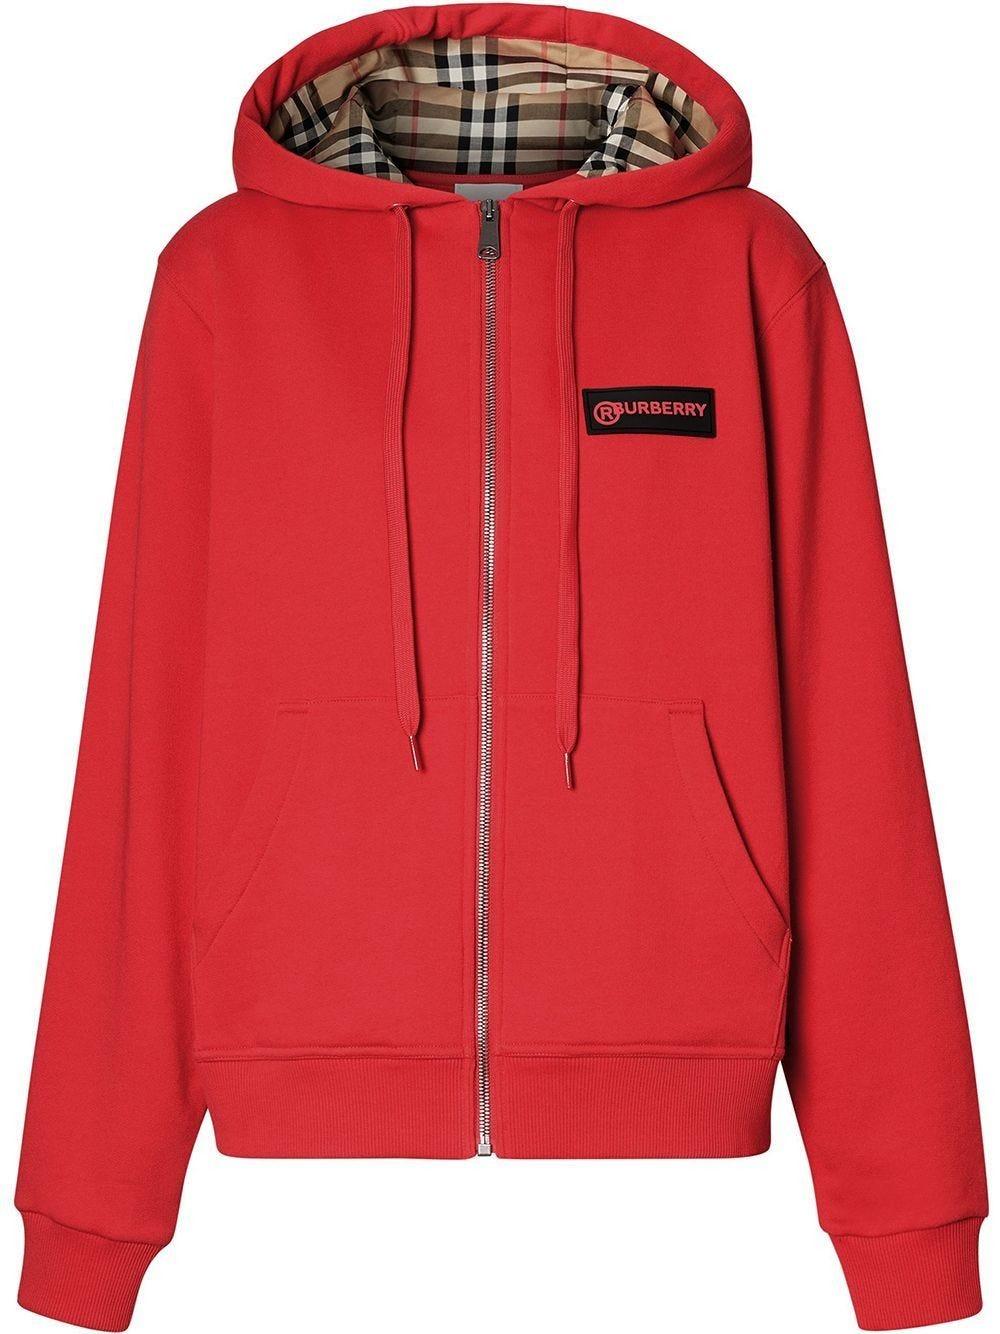 Burberry Vintage Check Zipped Hoodie in Red | Lyst